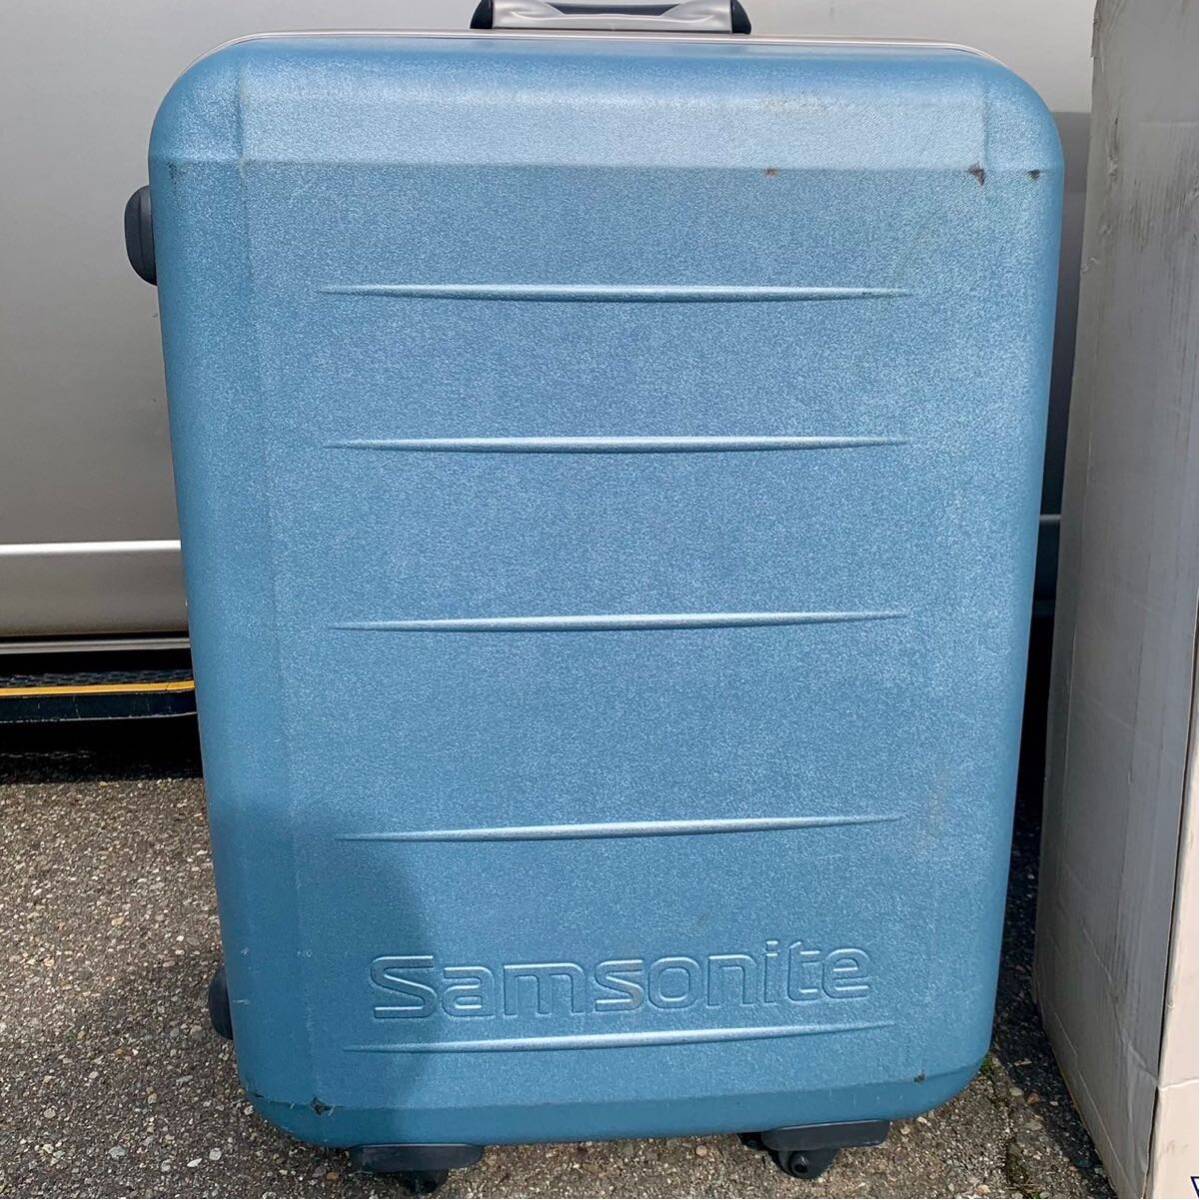 Samsonite Samsonite large suitcase Carry case carry bag travel travel high capacity out box attaching hard Carry case 